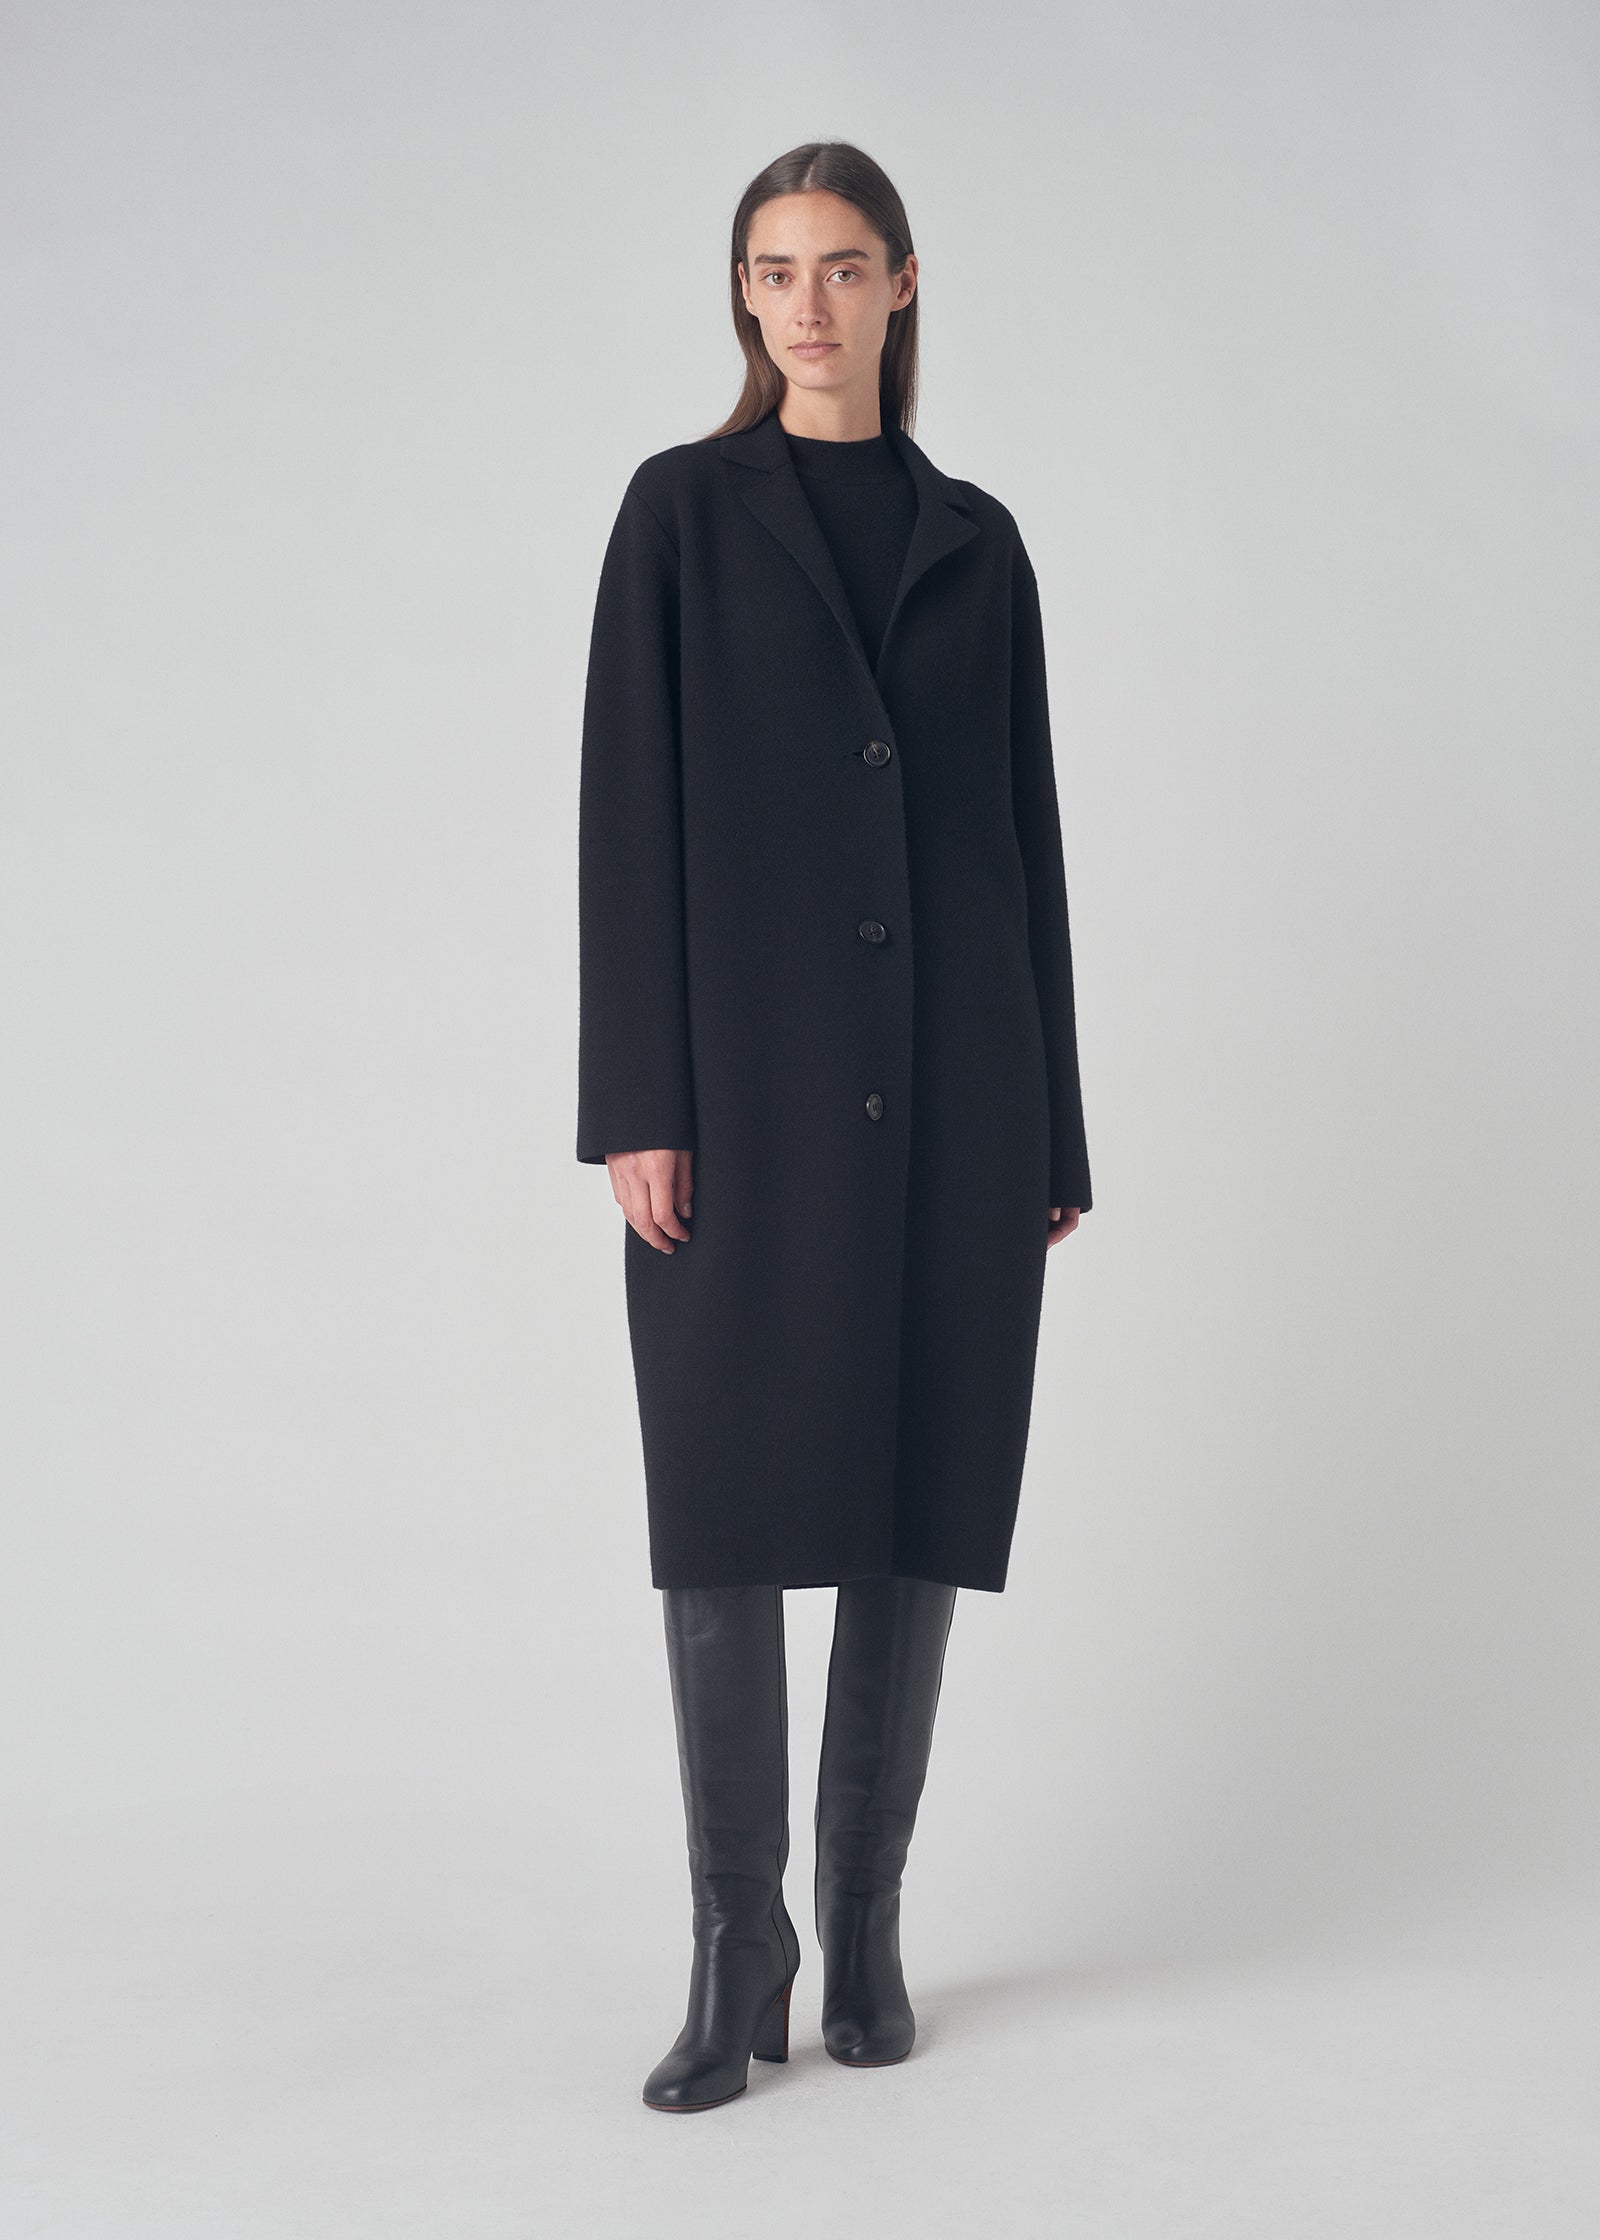 Compact Knit Coat in Merino Wool - CO Collections